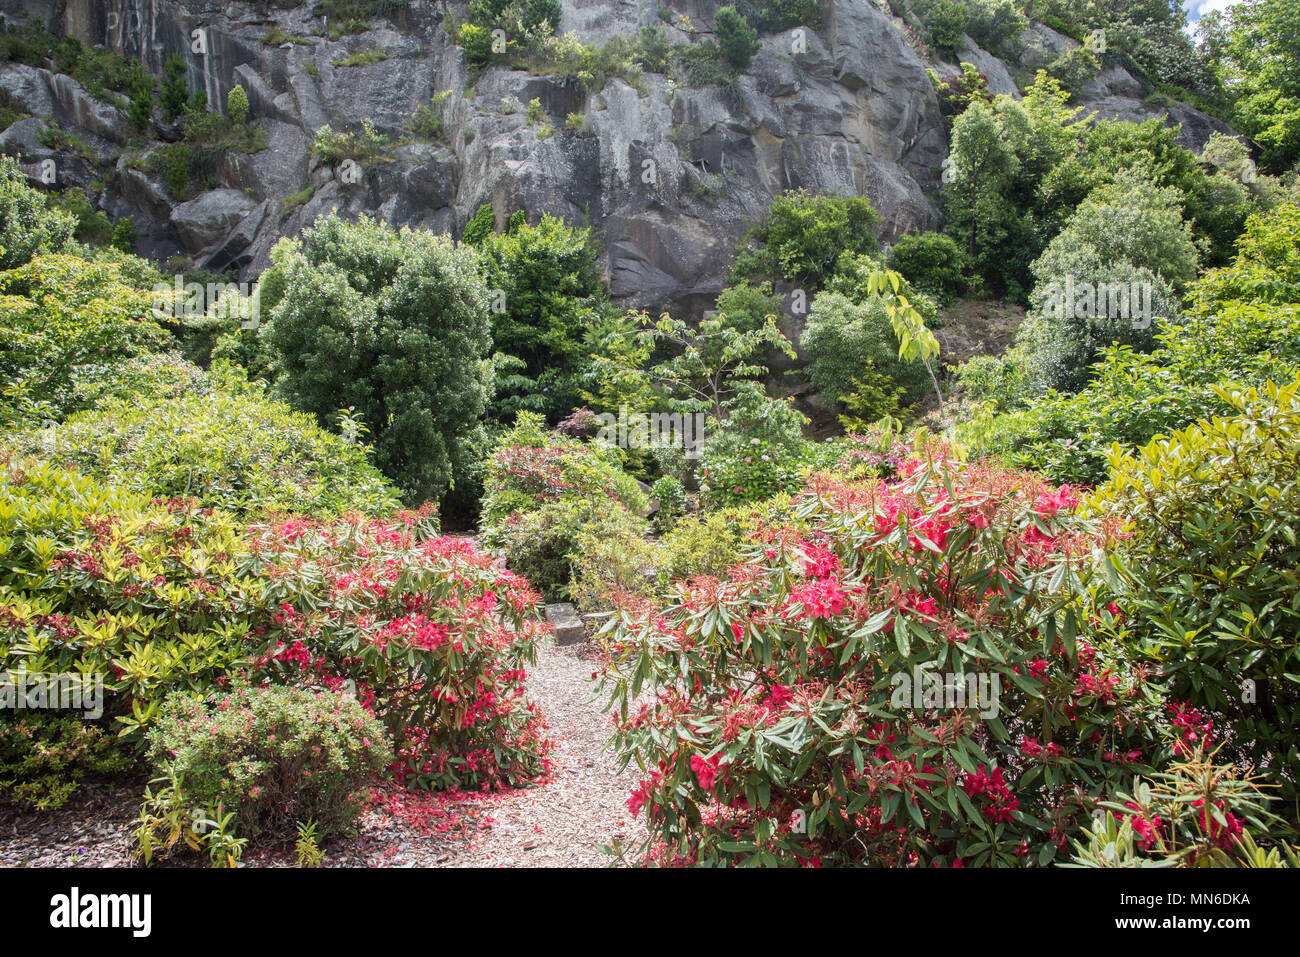 Lady Thorn Dell Rhododendron free public garden with flowering plants, trees and natural rock face in Port Chalmers, Dunedin, New Zealand Stock Photo